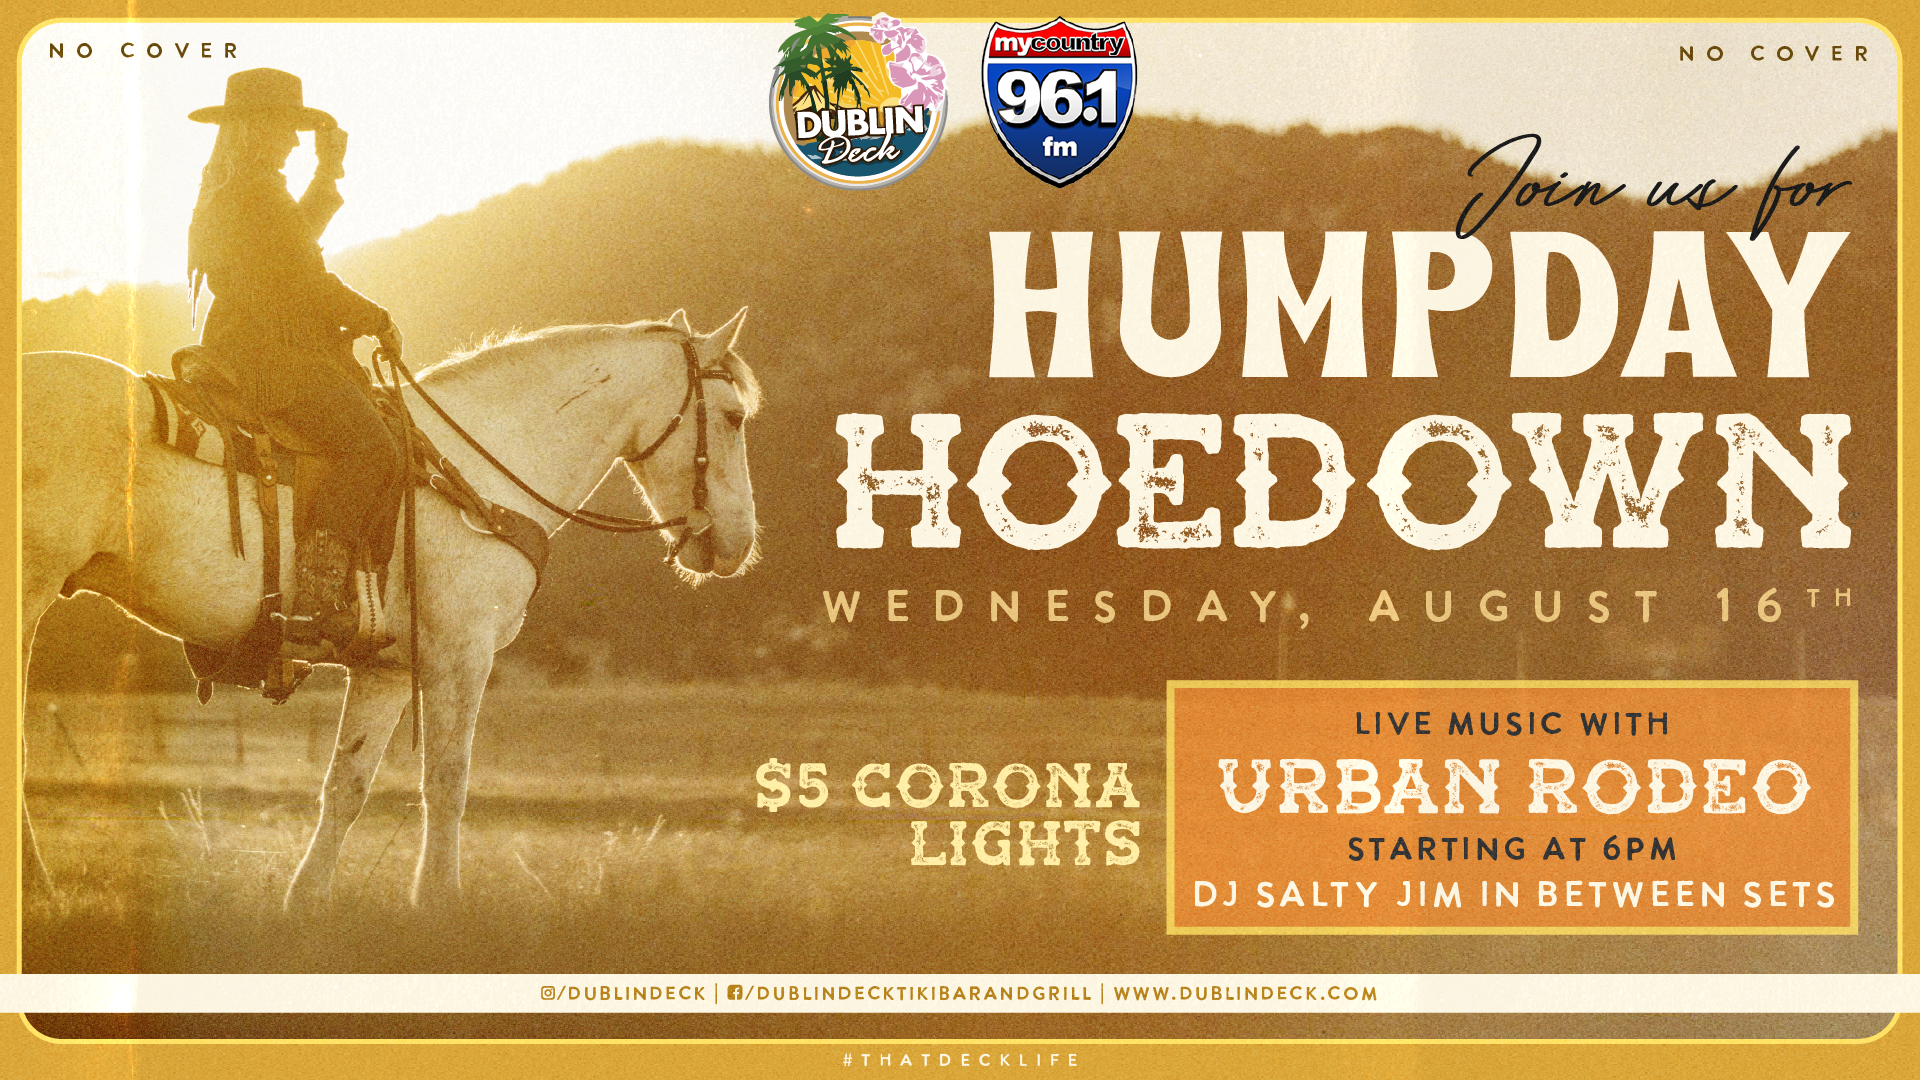 Saddle up for another Humpday Hoedown with Urban Rodeo! Music begins at 6PM